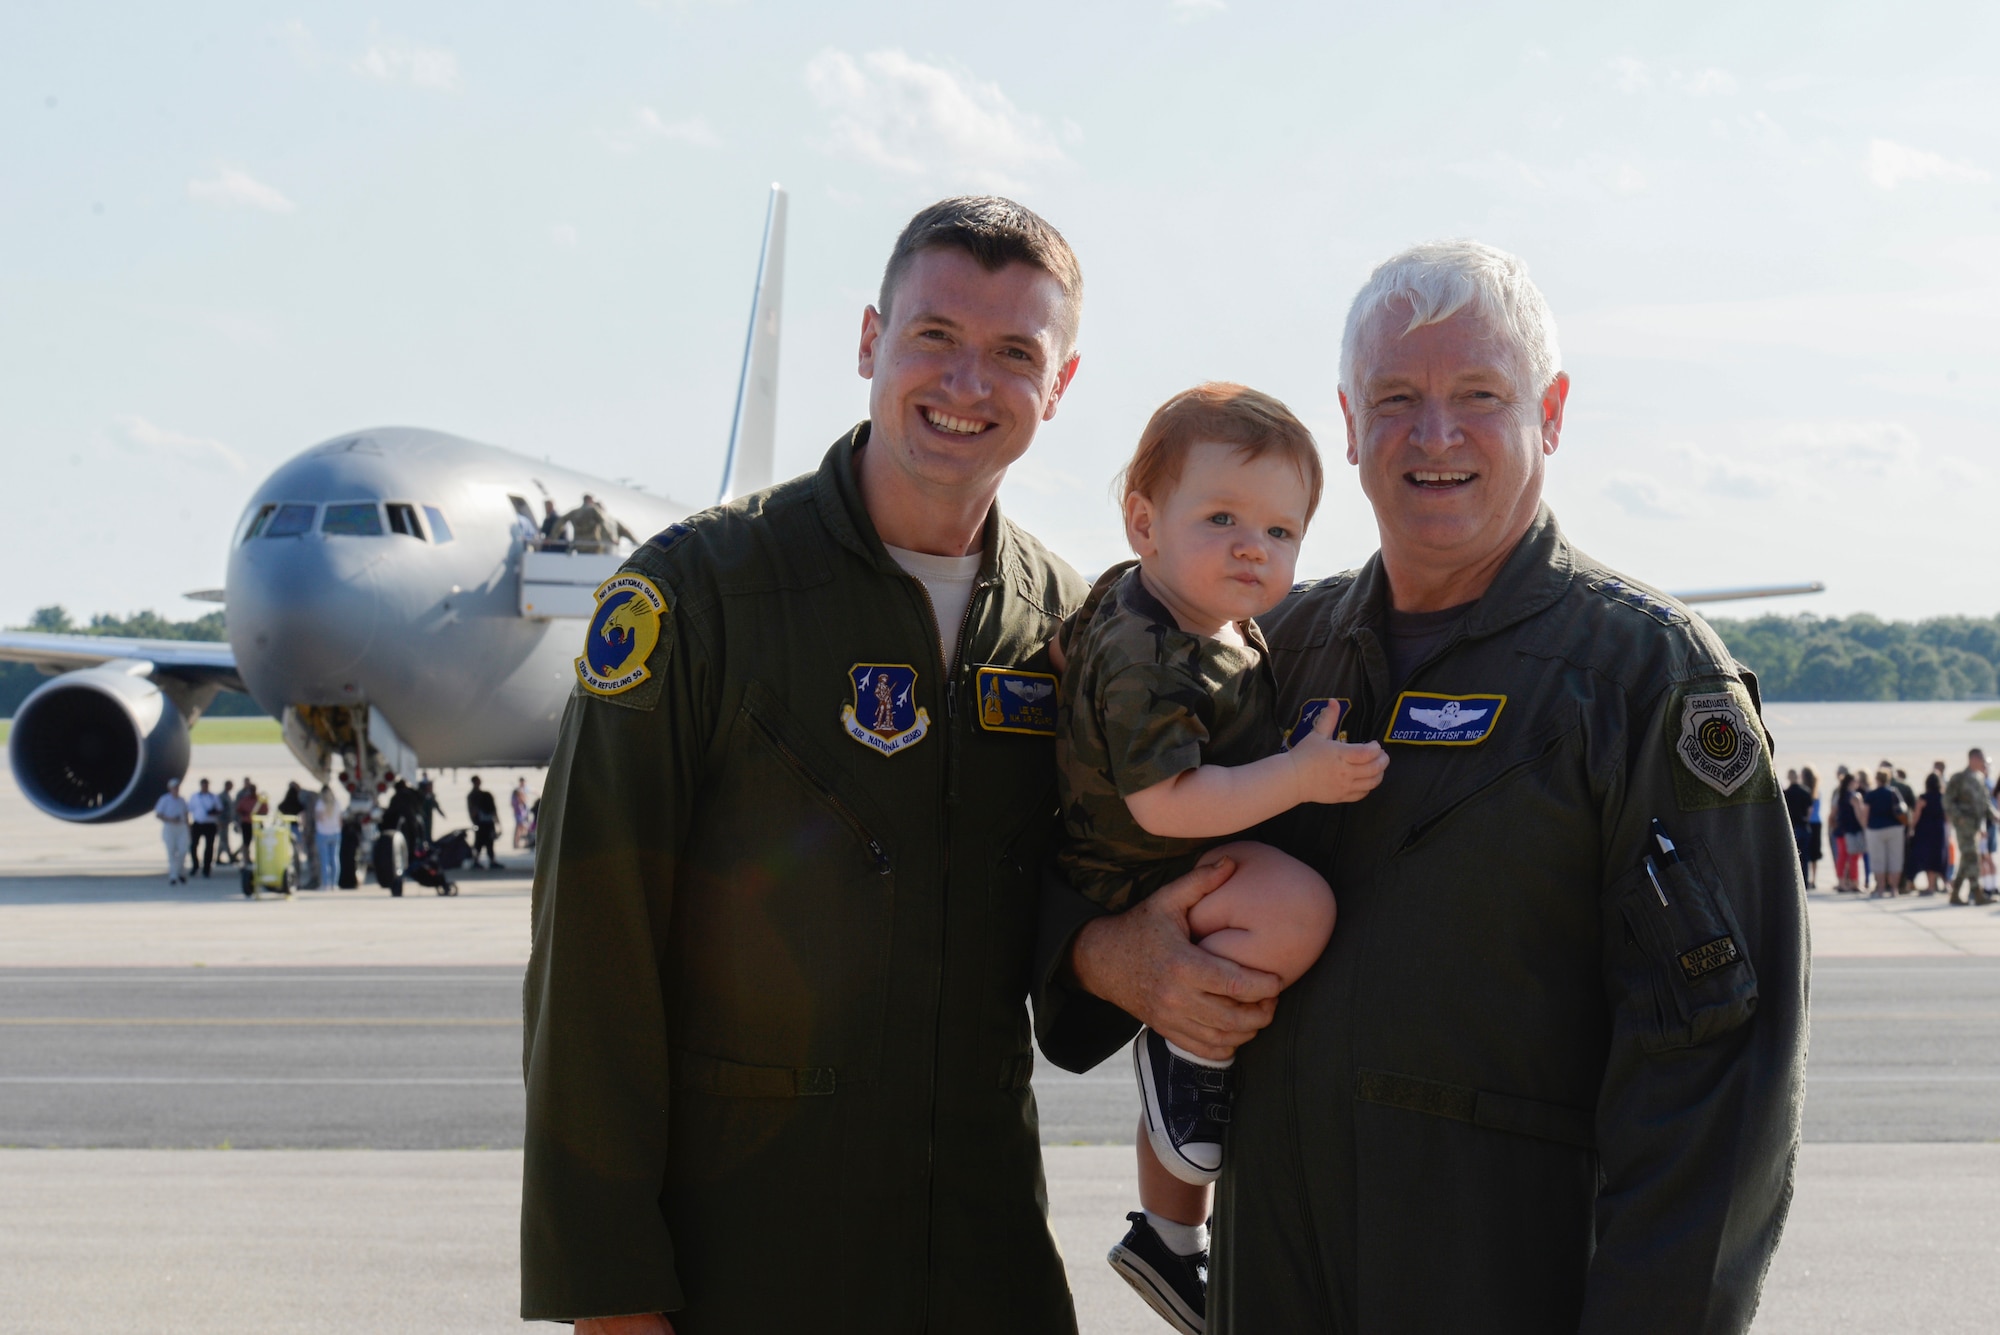 Lt. Gen. L. Scott Rice, Director of the Air National Guard, poses with his son, Capt. Leon Rice, a pilot assigned to the 157th Air Refueling Wing, and his grandson in front of the new KC-46A Pegasus Aug. 8, 2019 at Pease Air National Guard Base, N.H. Rice celebrated his last flight in his Air Force career, flying in with his son back to their home state and delivering the first KC-46 to Pease. (U.S. Air National Guard photo by Senior Airman Victoria Nelson)